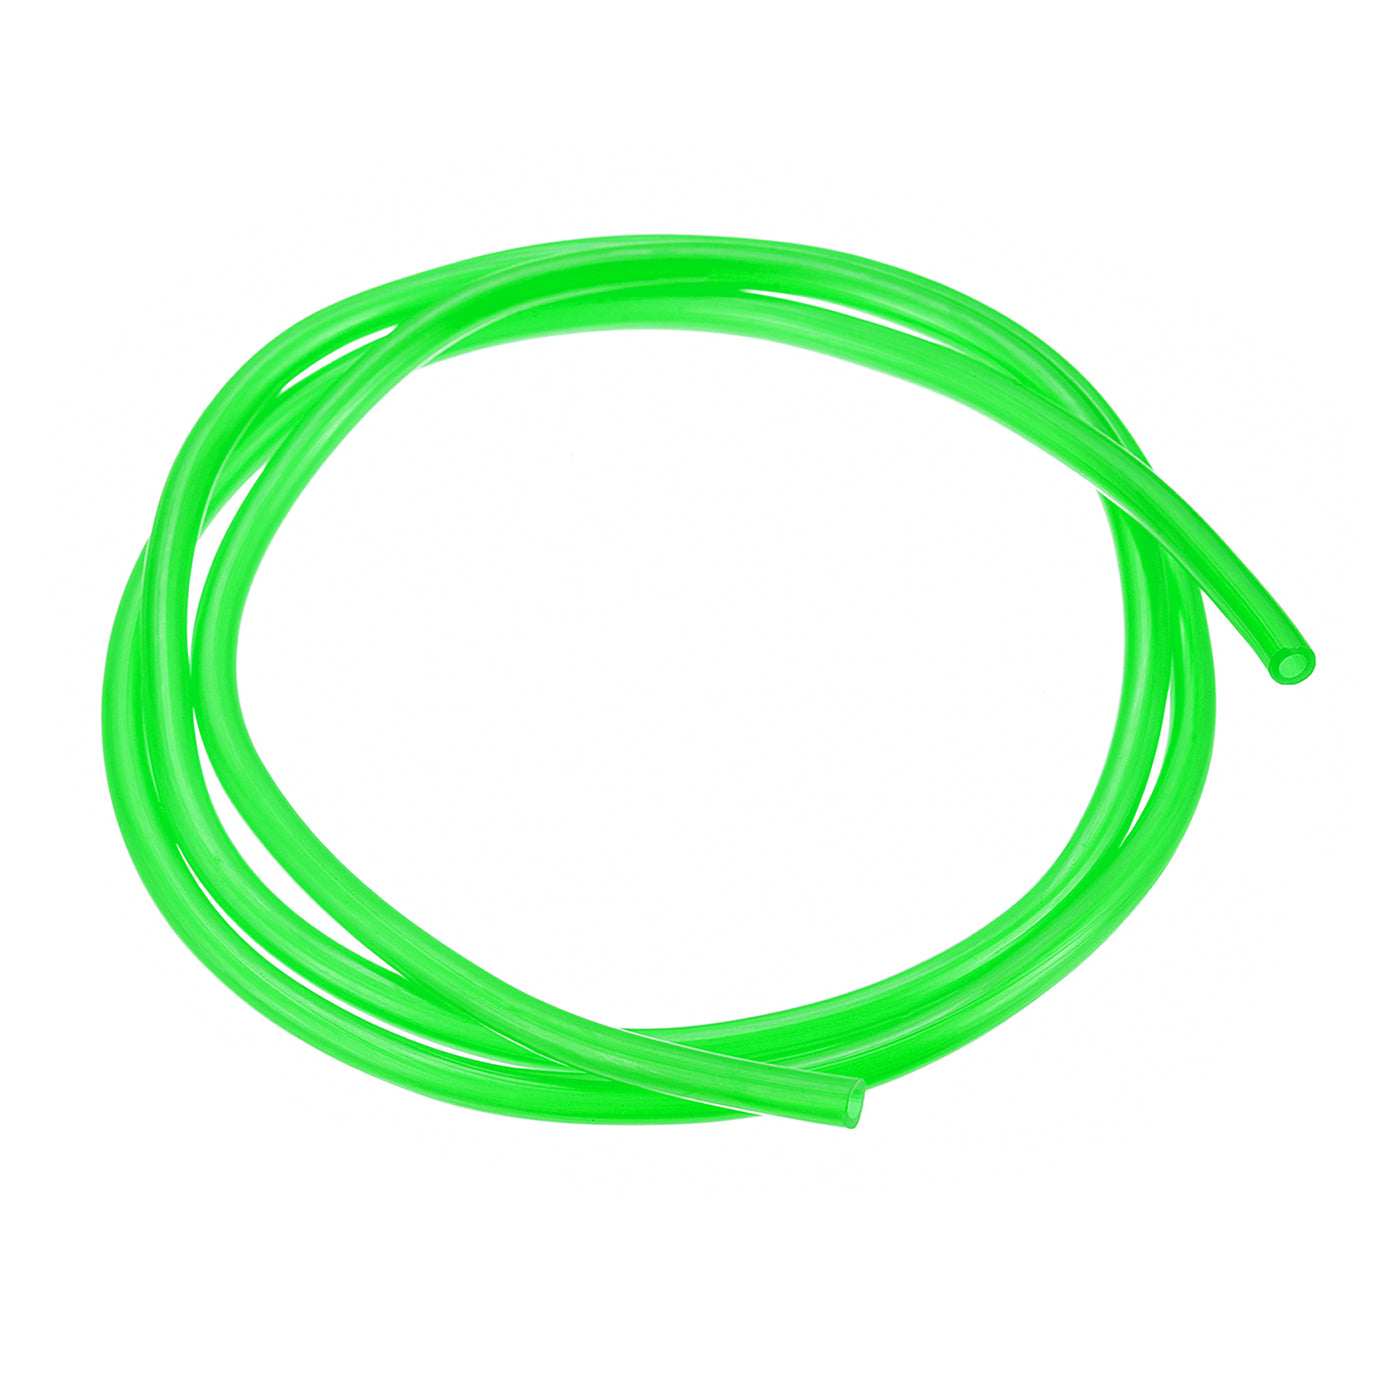 uxcell Uxcell Color Hose Tubing 1/8" ID, 13/64" OD 1Pcs 3.28 Ft for Pump Transfer, Green